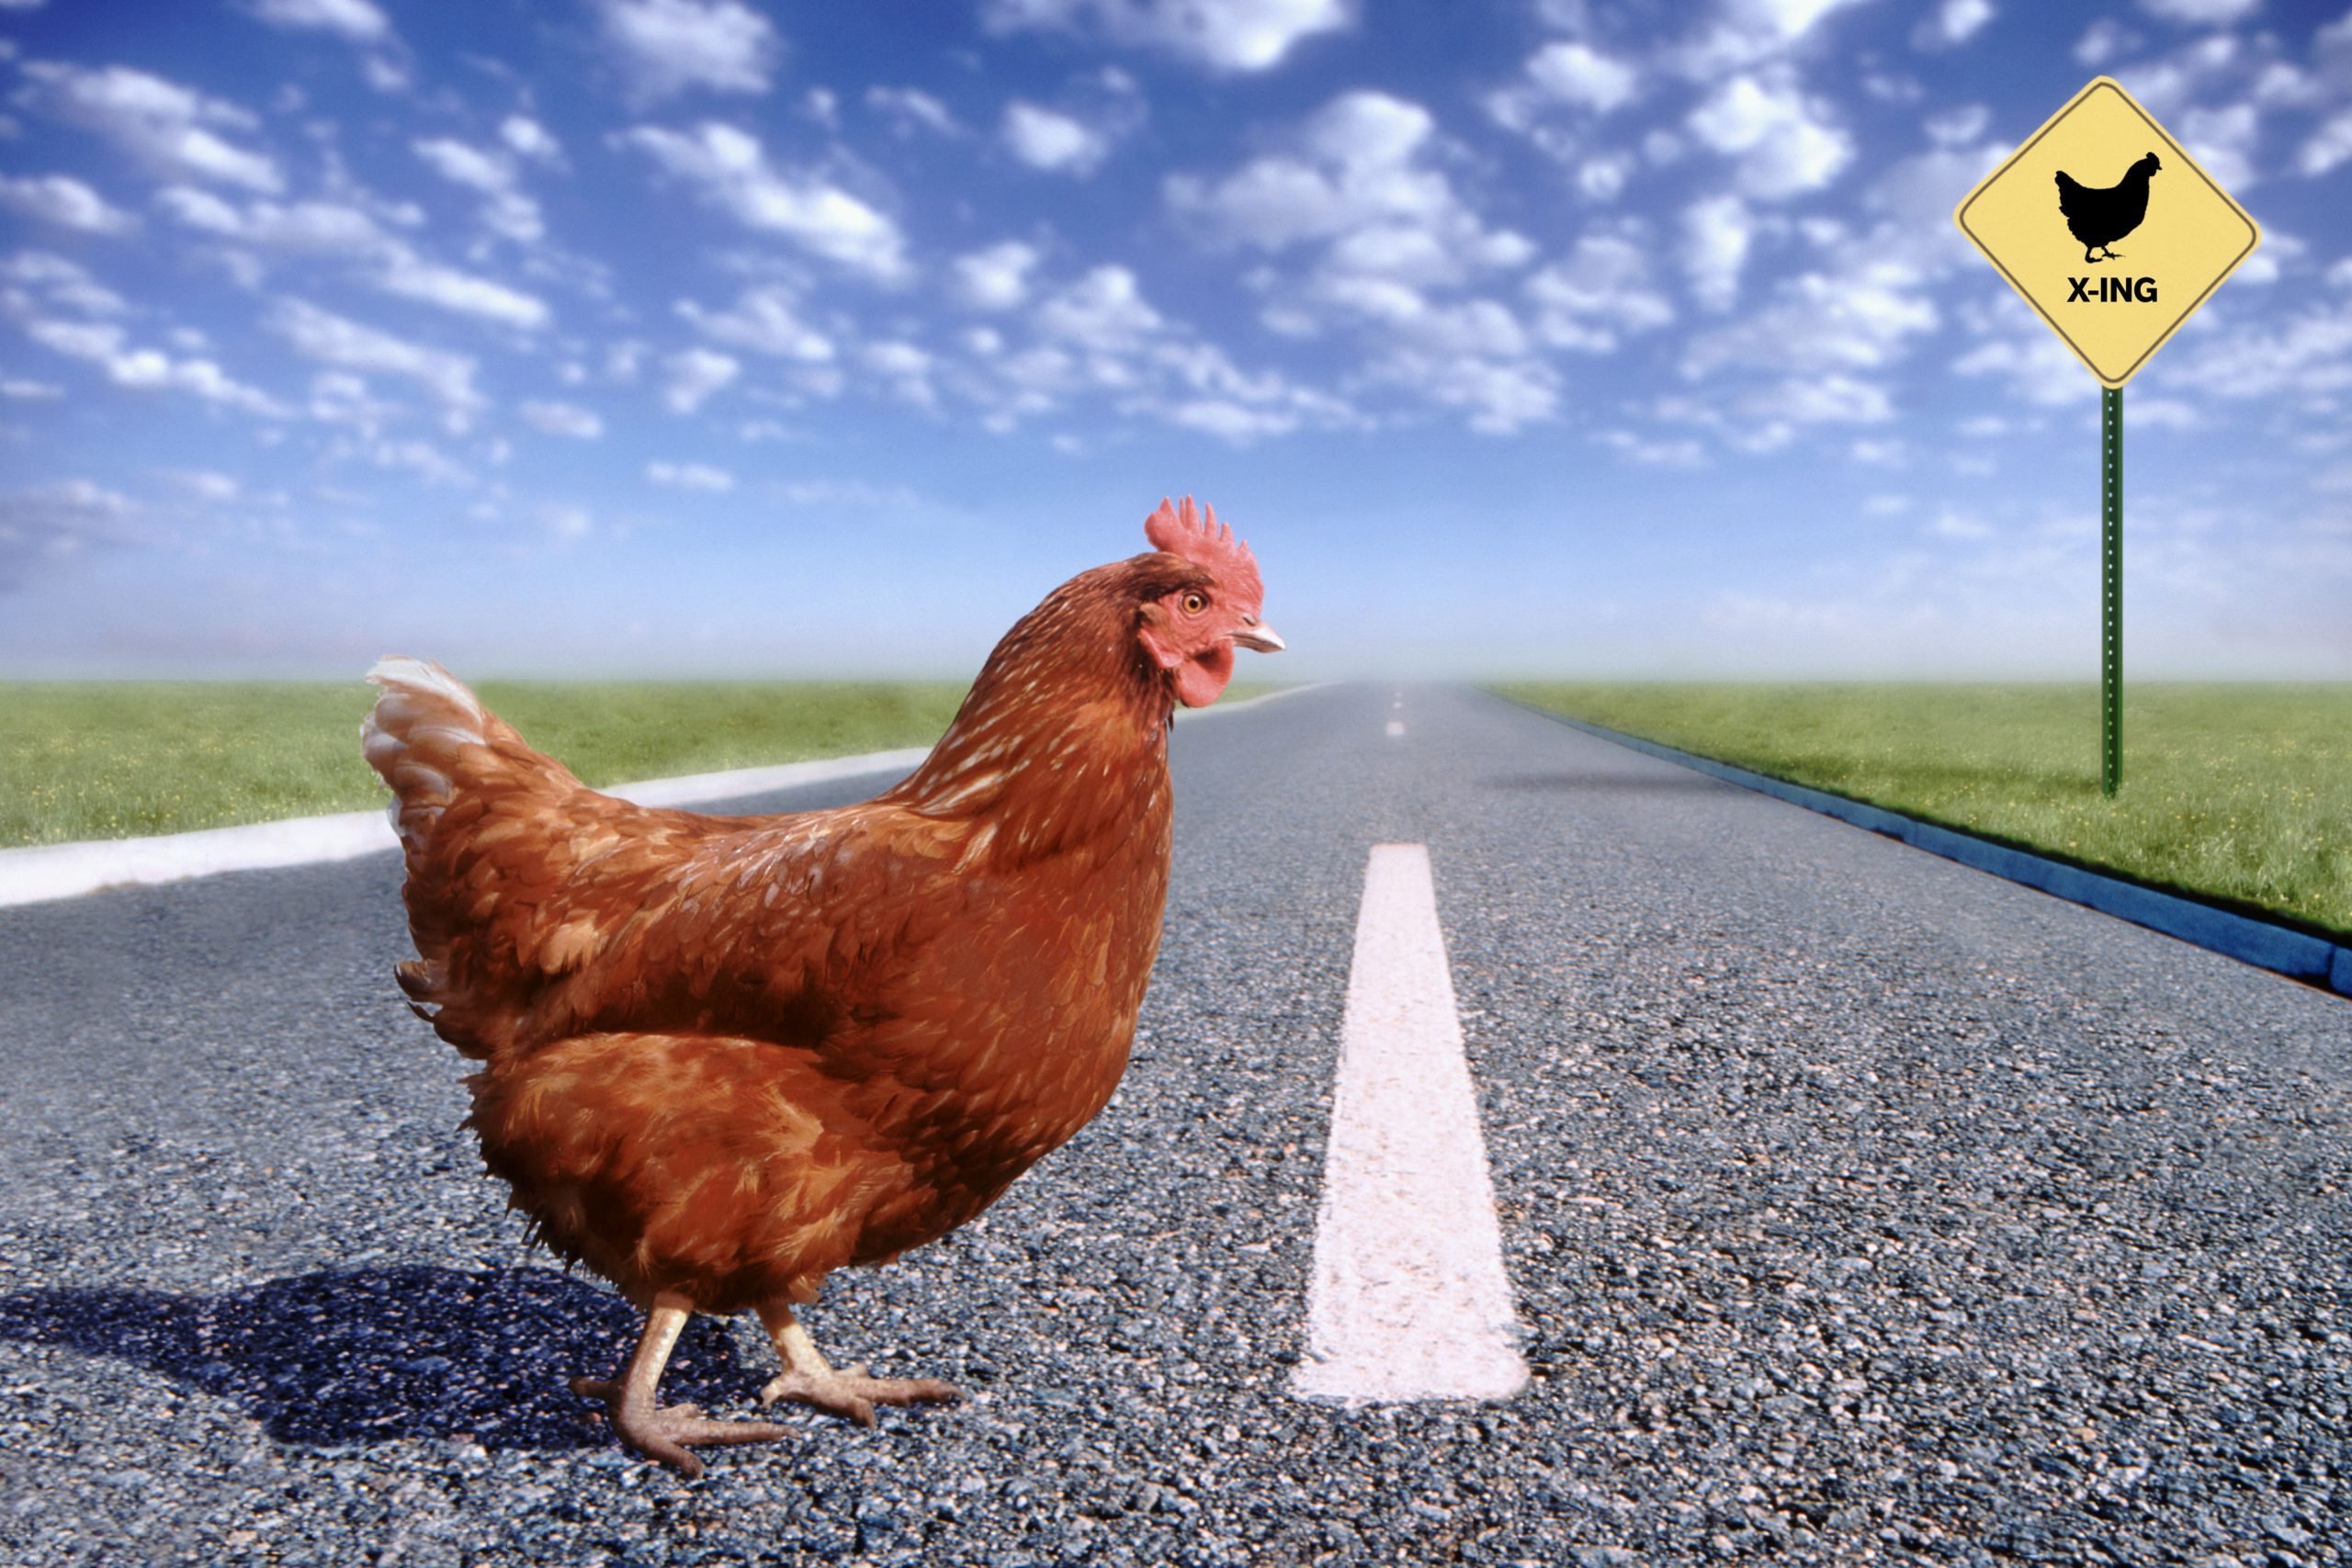 30 Funny Why Did the Chicken Cross the Road Jokes